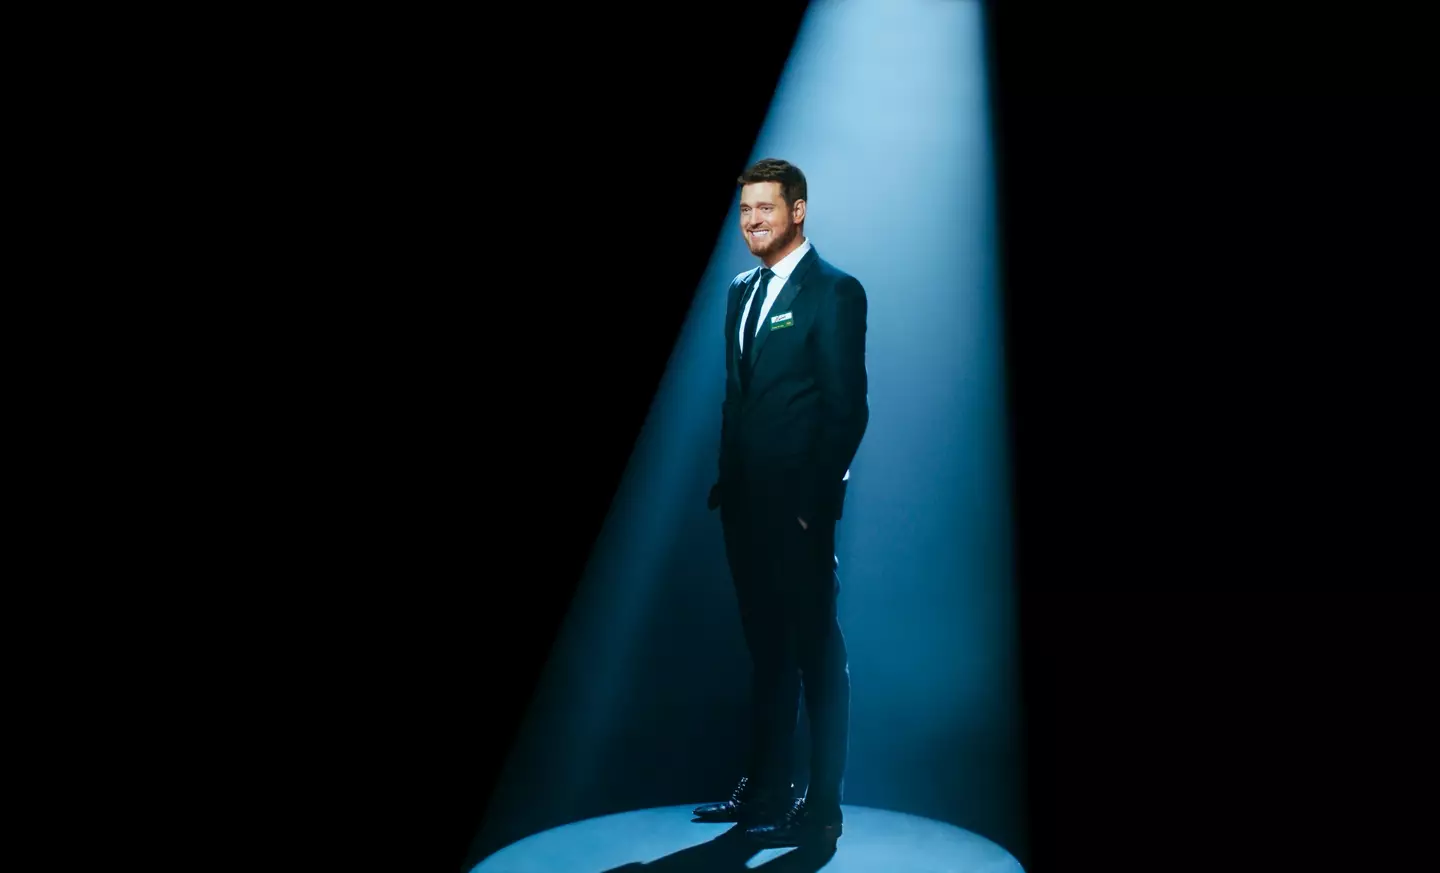 Michael Bublé is making his Asda debut.